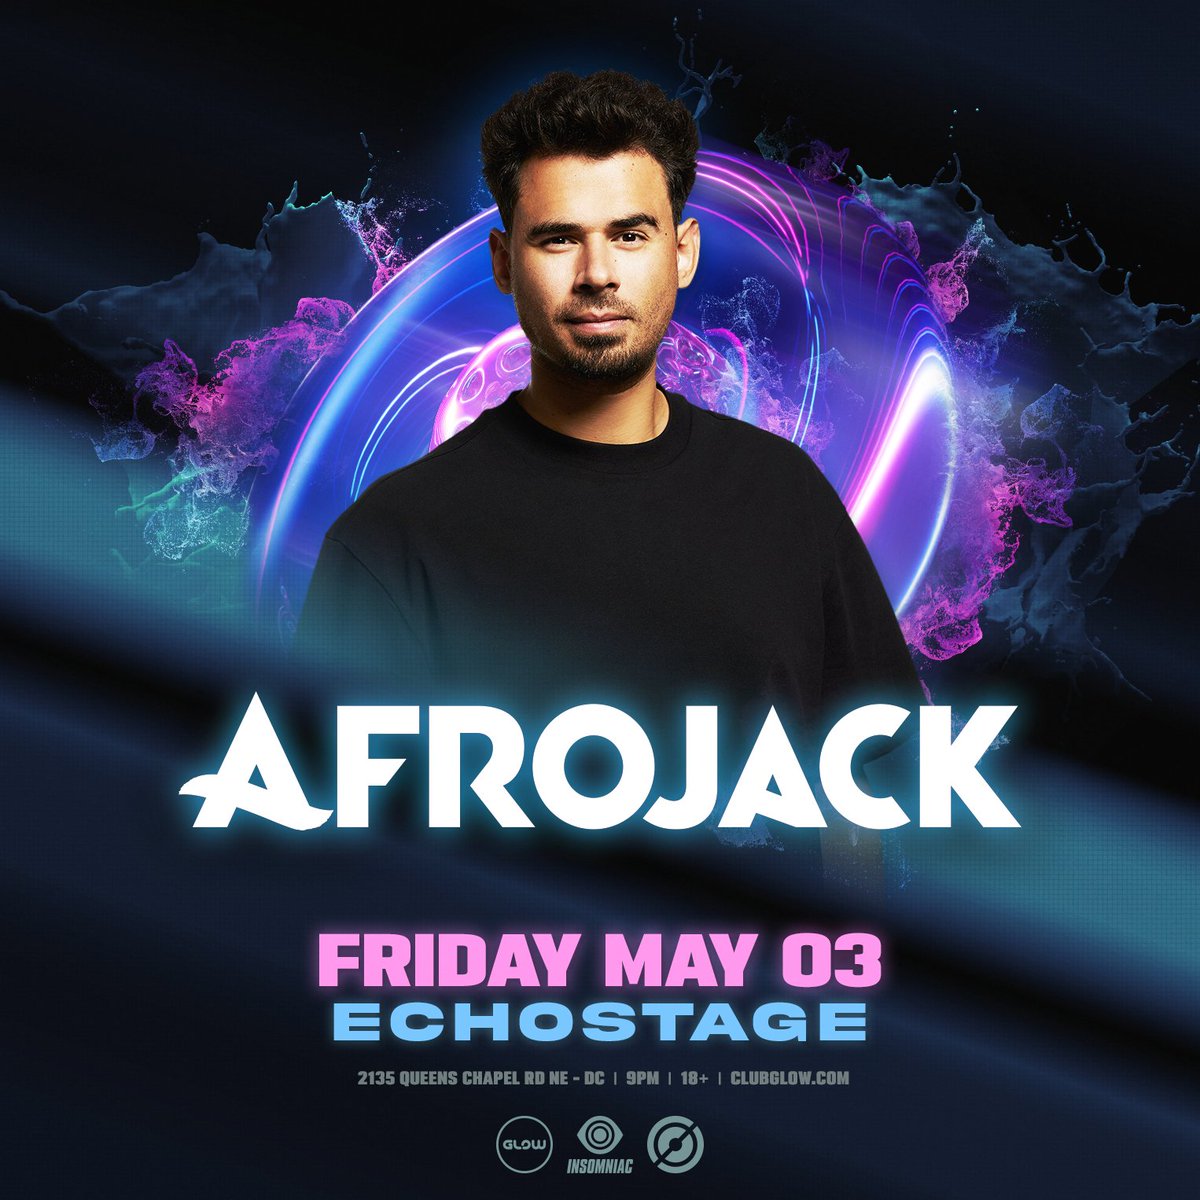 🎶 @afrojack crushed it in Miami last week. Catch him at #Echostage on Friday, May 3rd.🪩 Tickets available now! → tix.echostage.com/AFROJACK-24